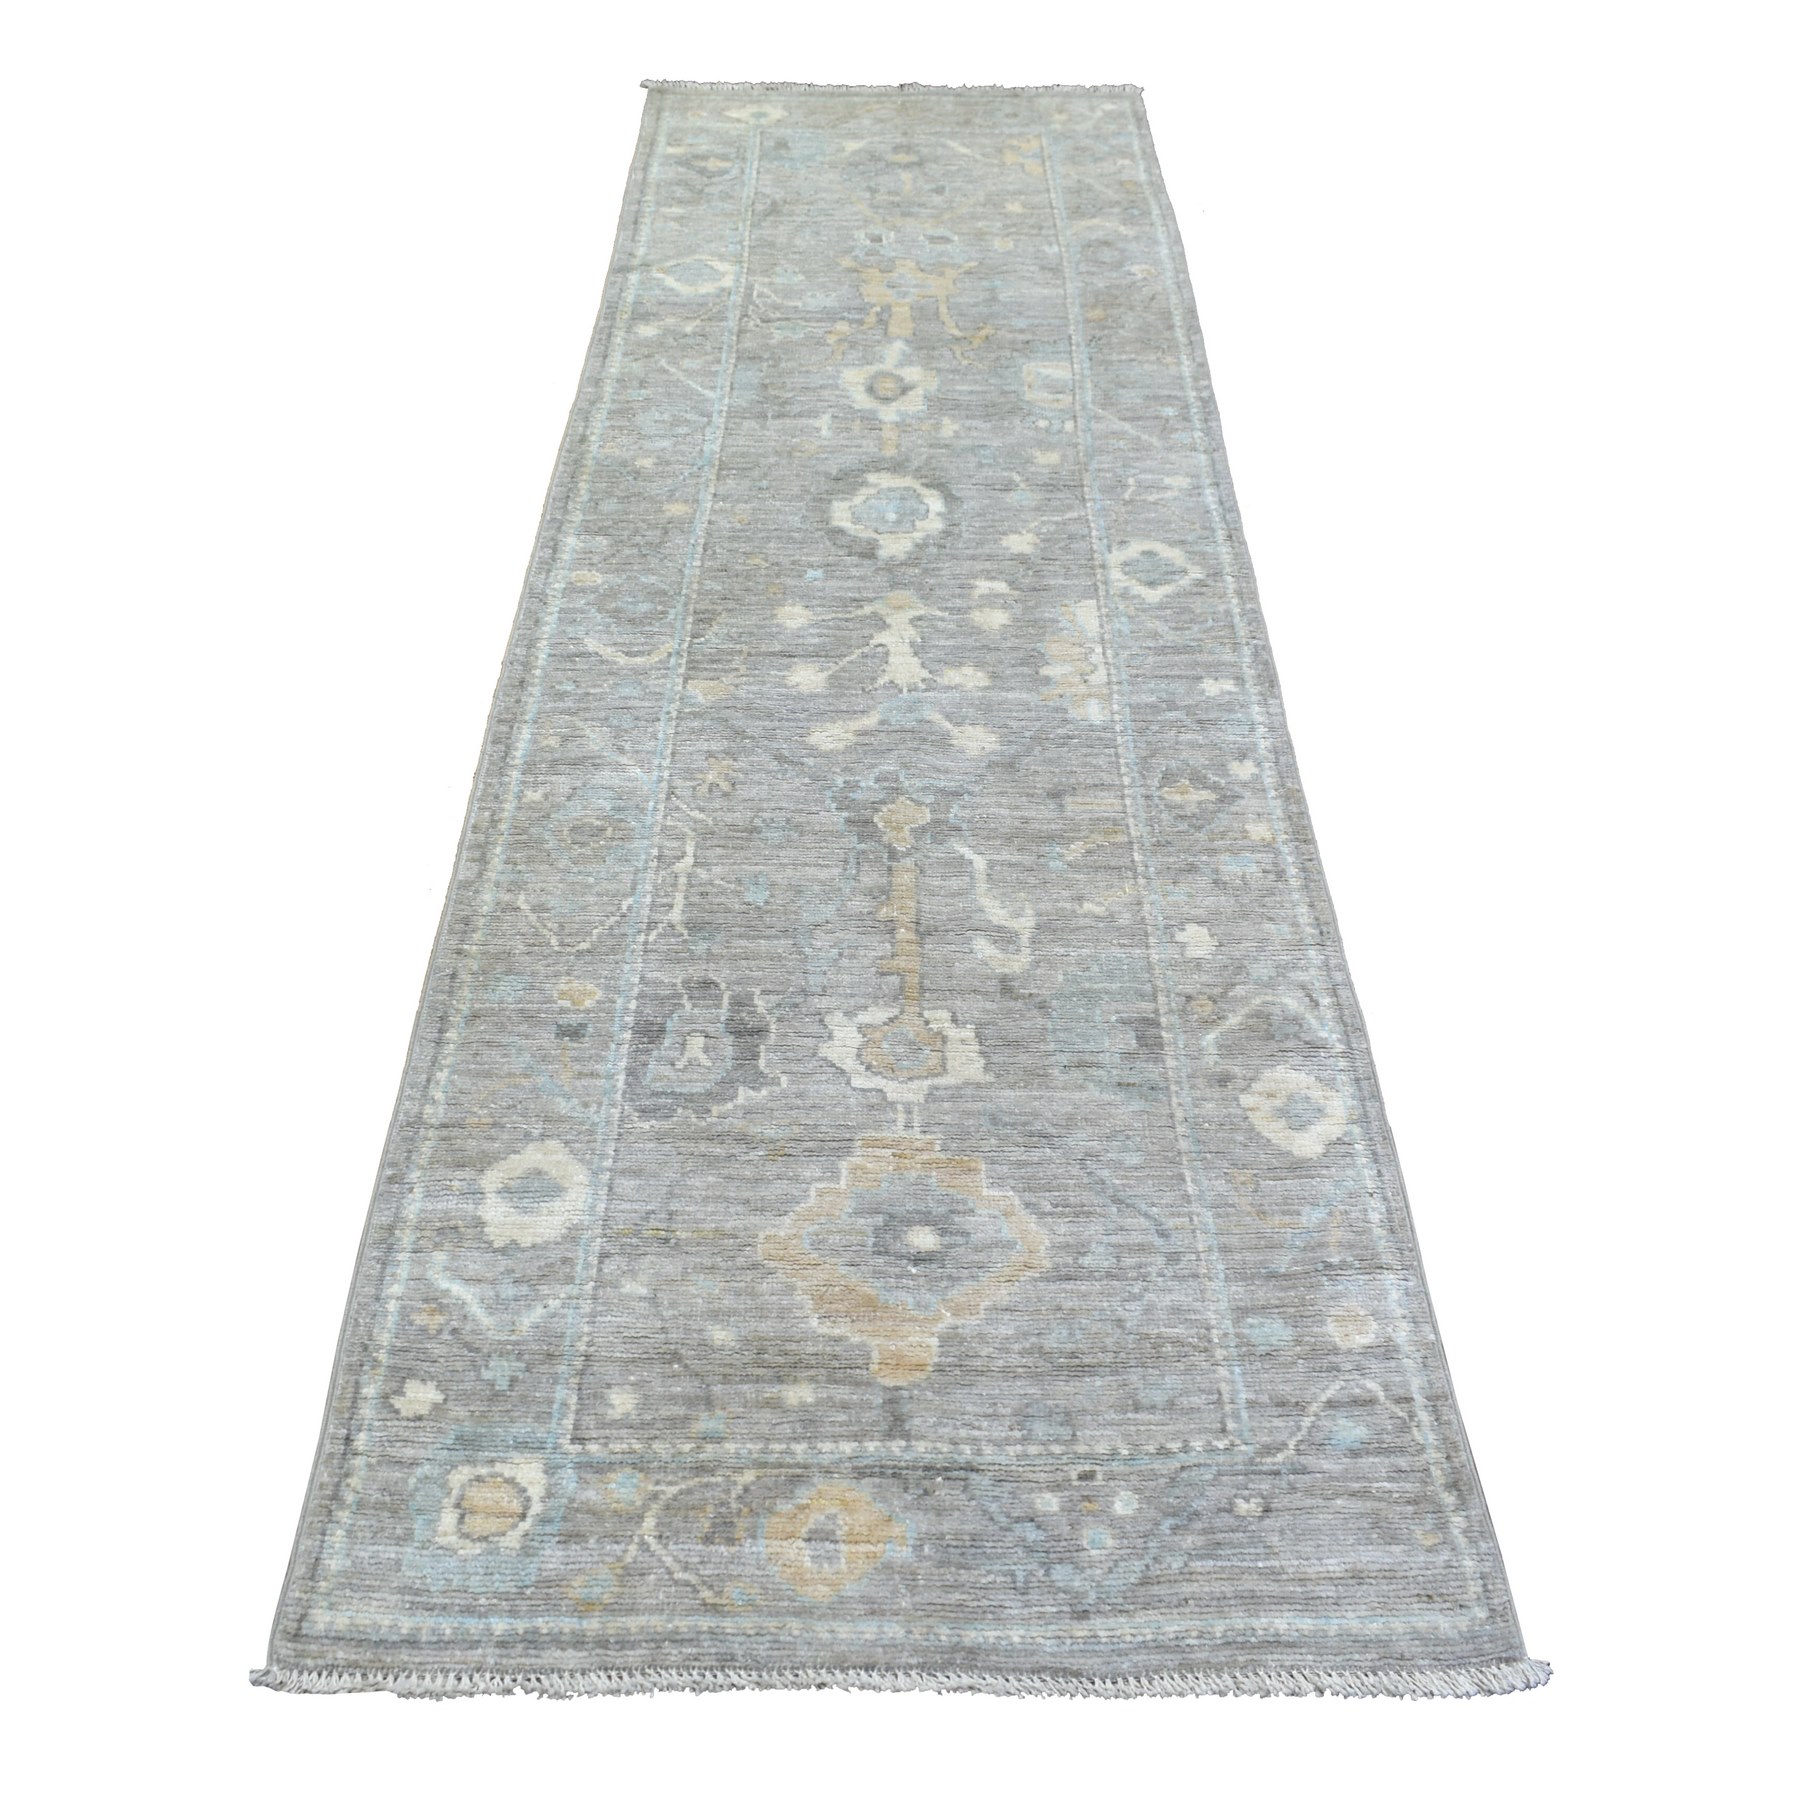 3'x9'9" Gray Hand Woven Angora Oushak With Colorful Large Leaf Design Natural Dyes, Afghan Wool Runner Oriental Rug 